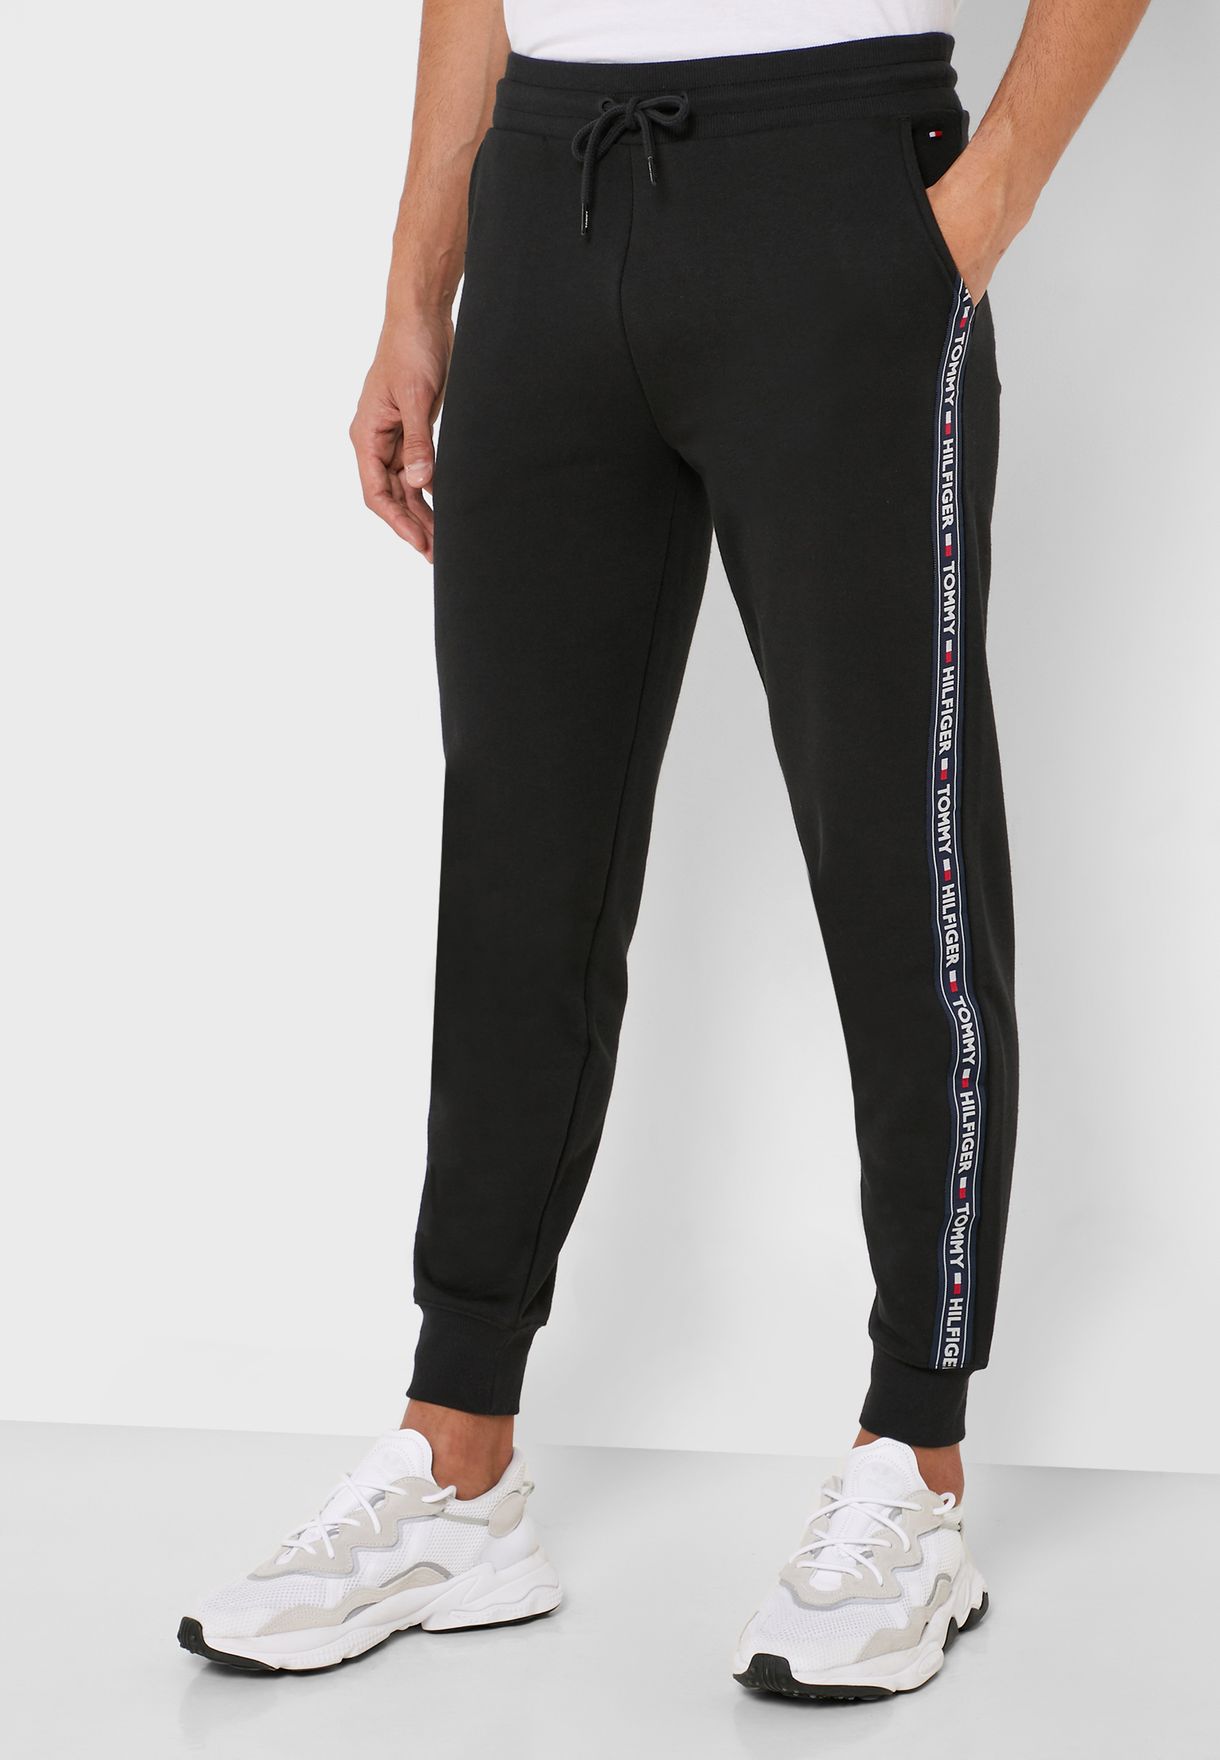 tommy hilfiger tape pants Cheaper Than 